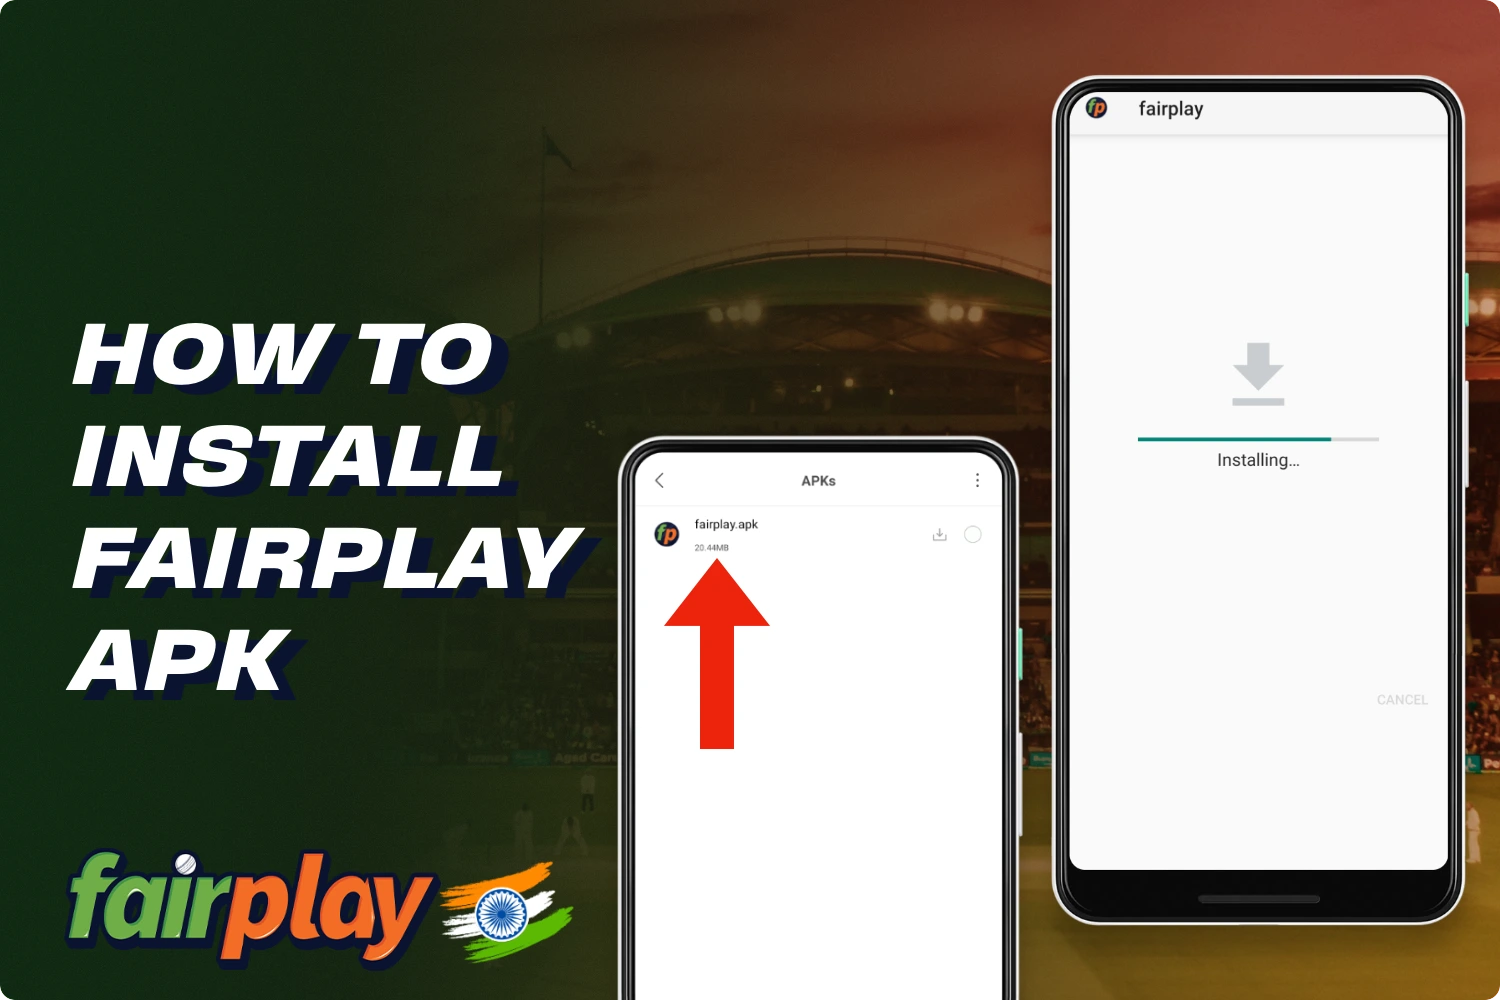 In order to install the Fairplay app on Android you need to follow a few simple steps